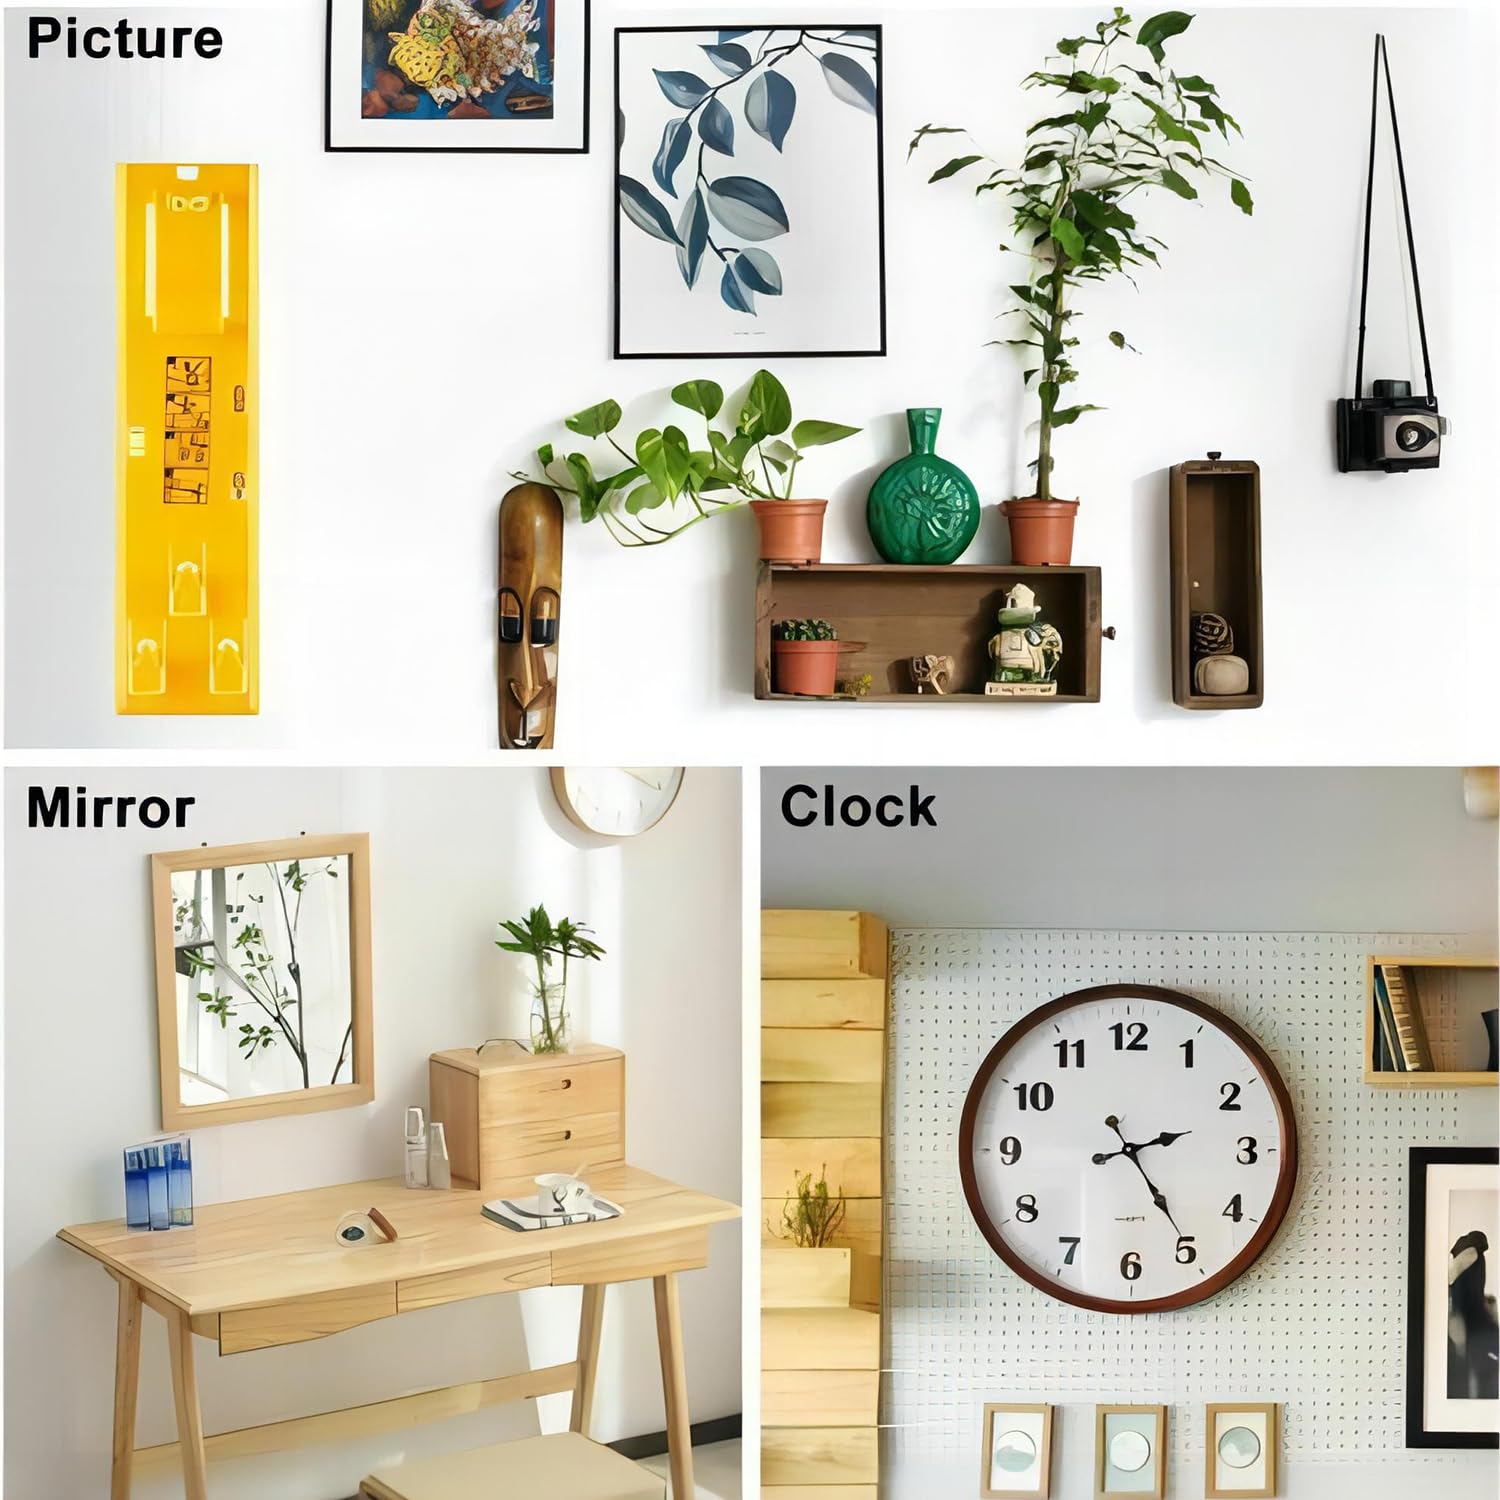 Ruxiiagn Picture Hanging Tool for Easy Making Position Frame Wall Hanger Photo Hanging Kit Level Ruler for Clock, Mirrors, Artworks, Photos